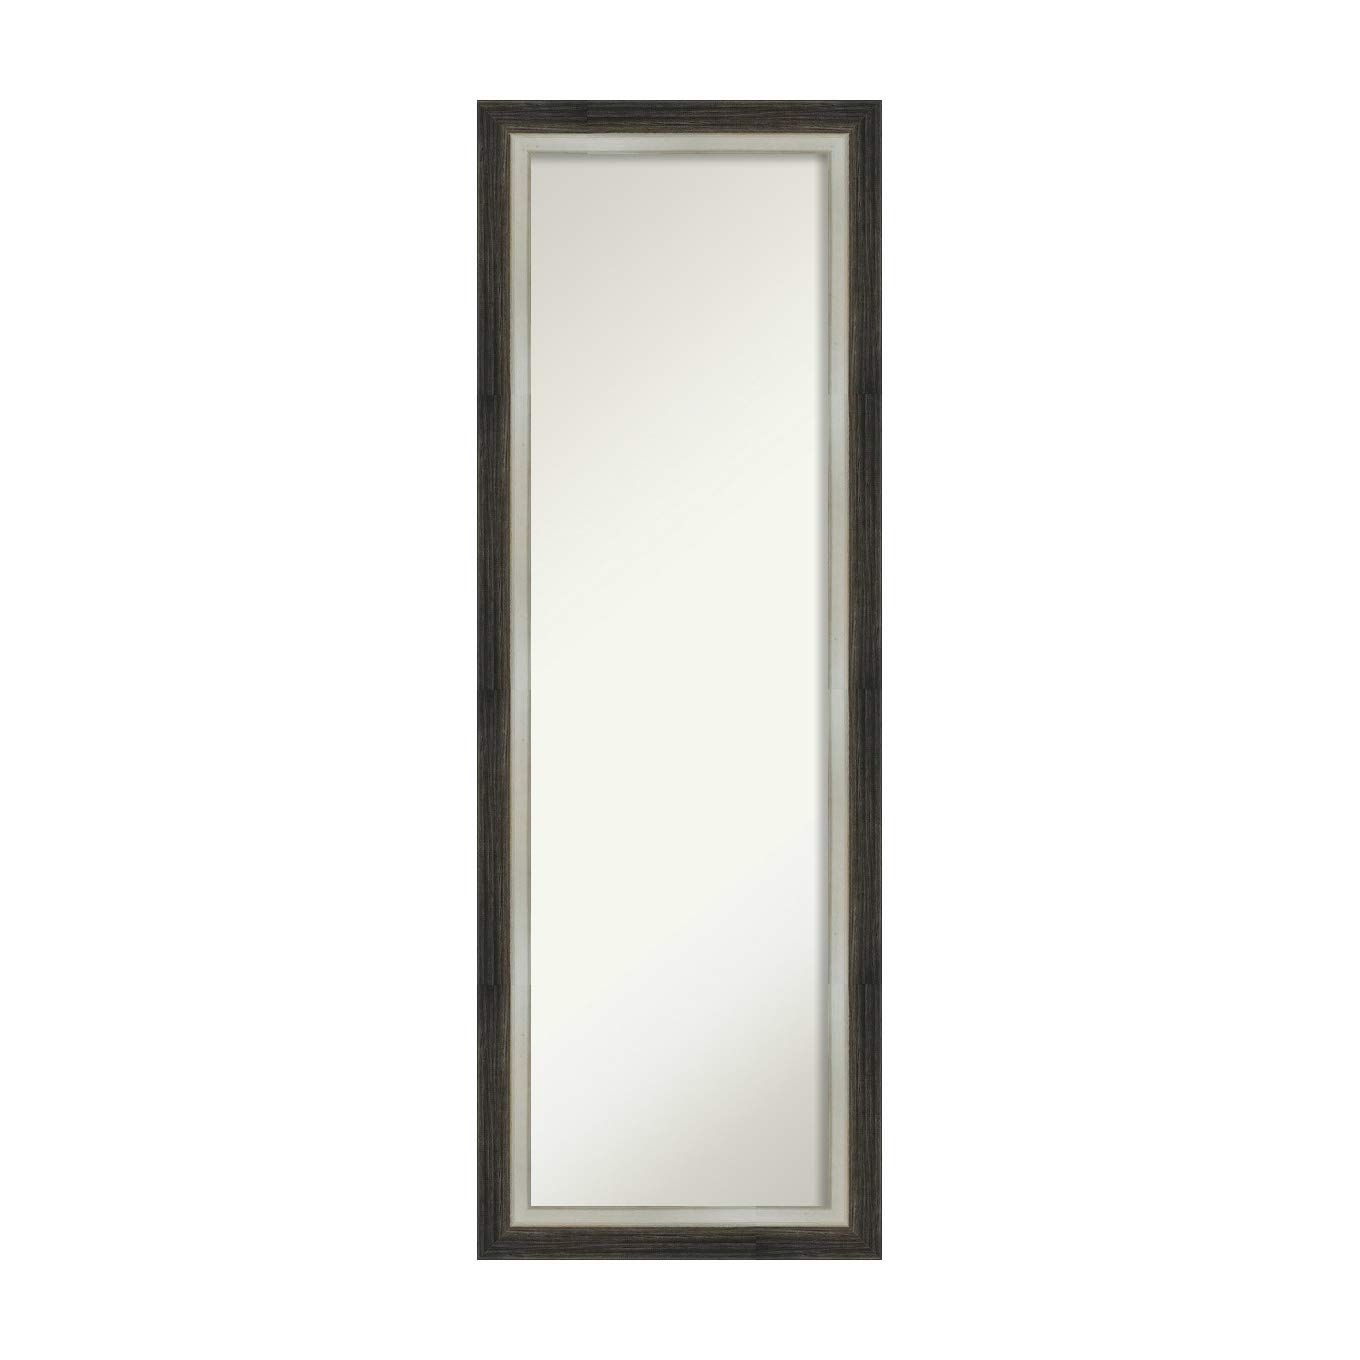 Amazon: Amanti Art On The Door Full Length Wall Mirror, Brushed In Well Liked Full Size Wall Mirrors (View 10 of 20)